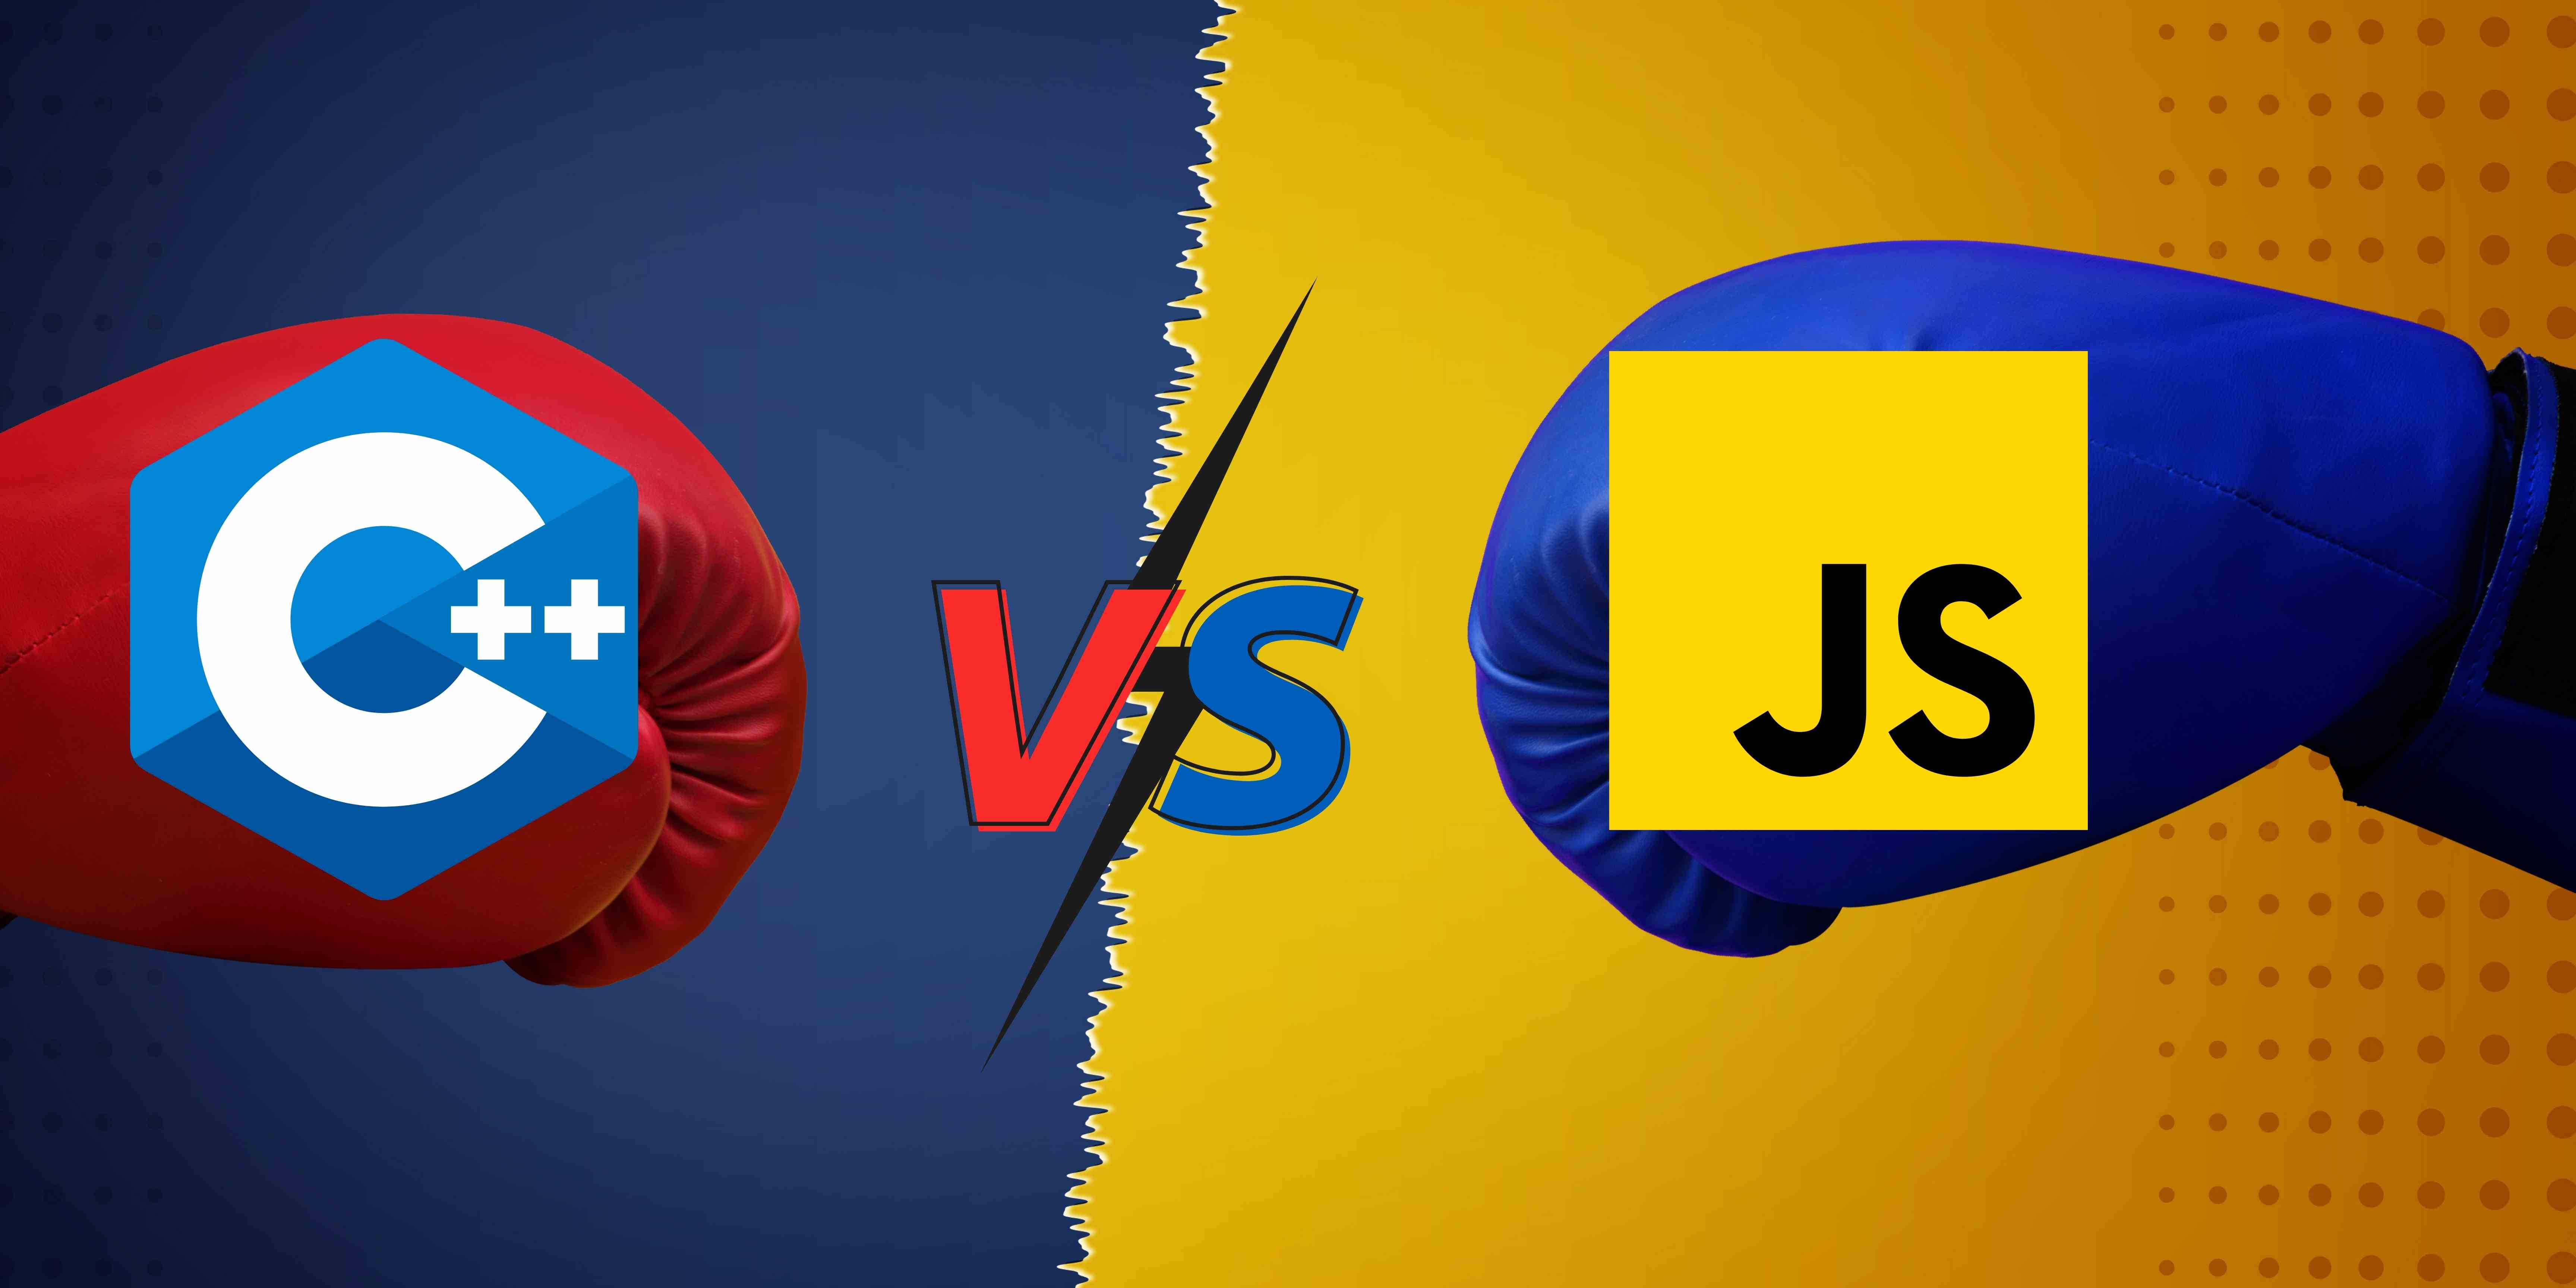 Difference Between C++ and Javascript